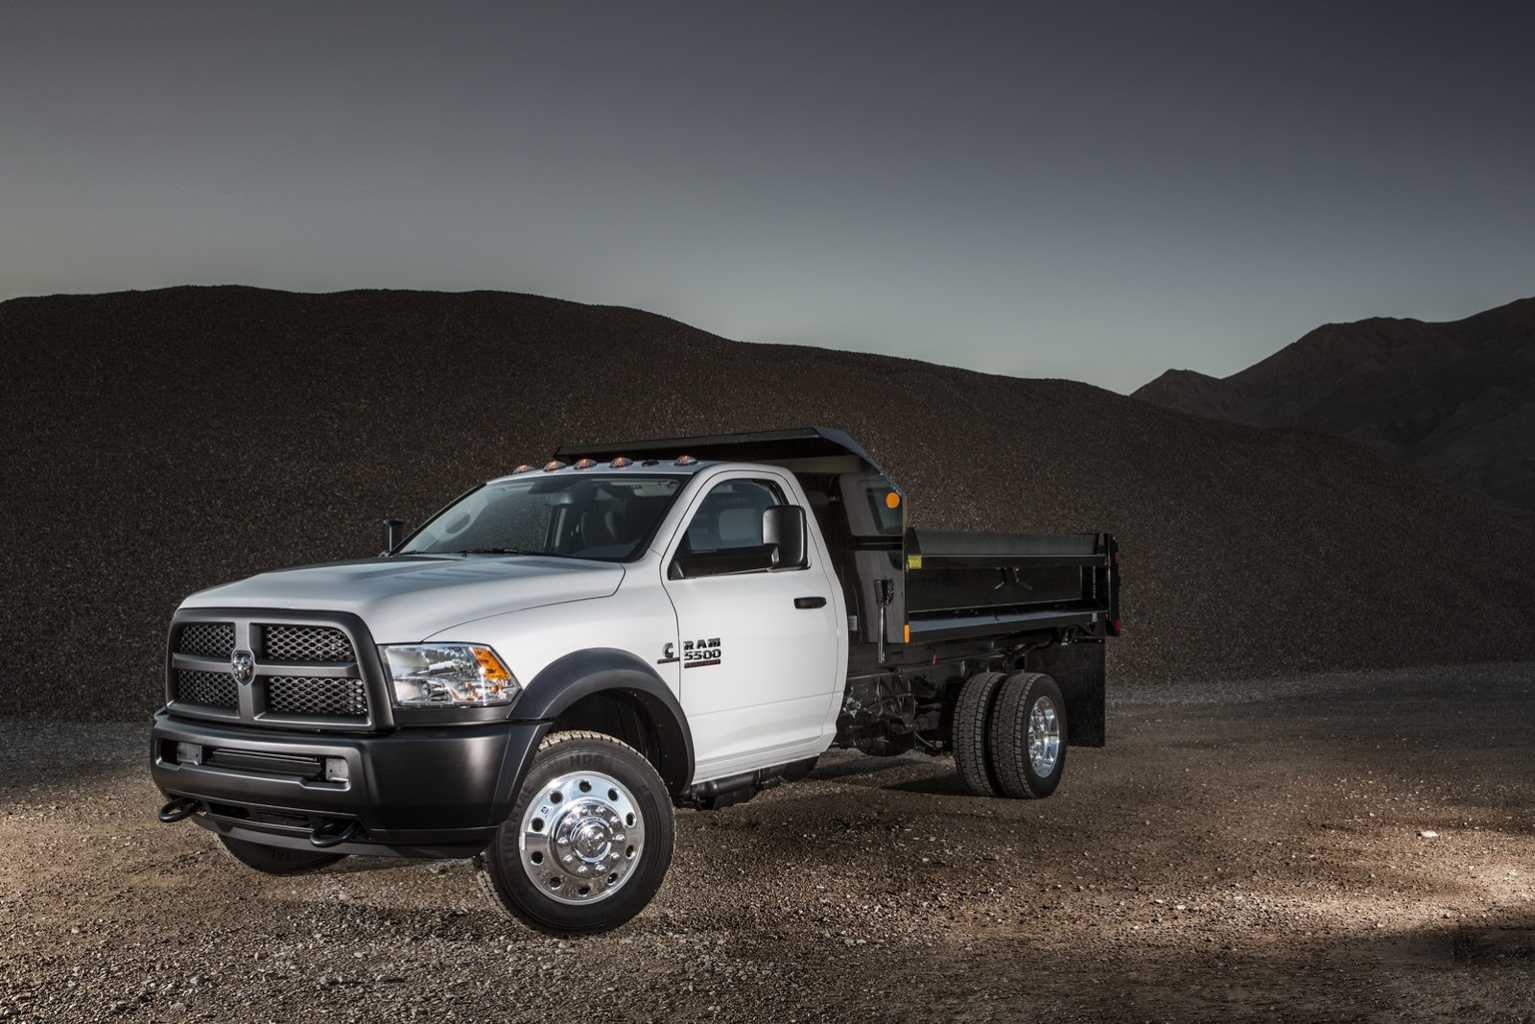 2014 Ram Truck and Pick-up V6 Turbo Diesel HD Wallpapers 8 ...